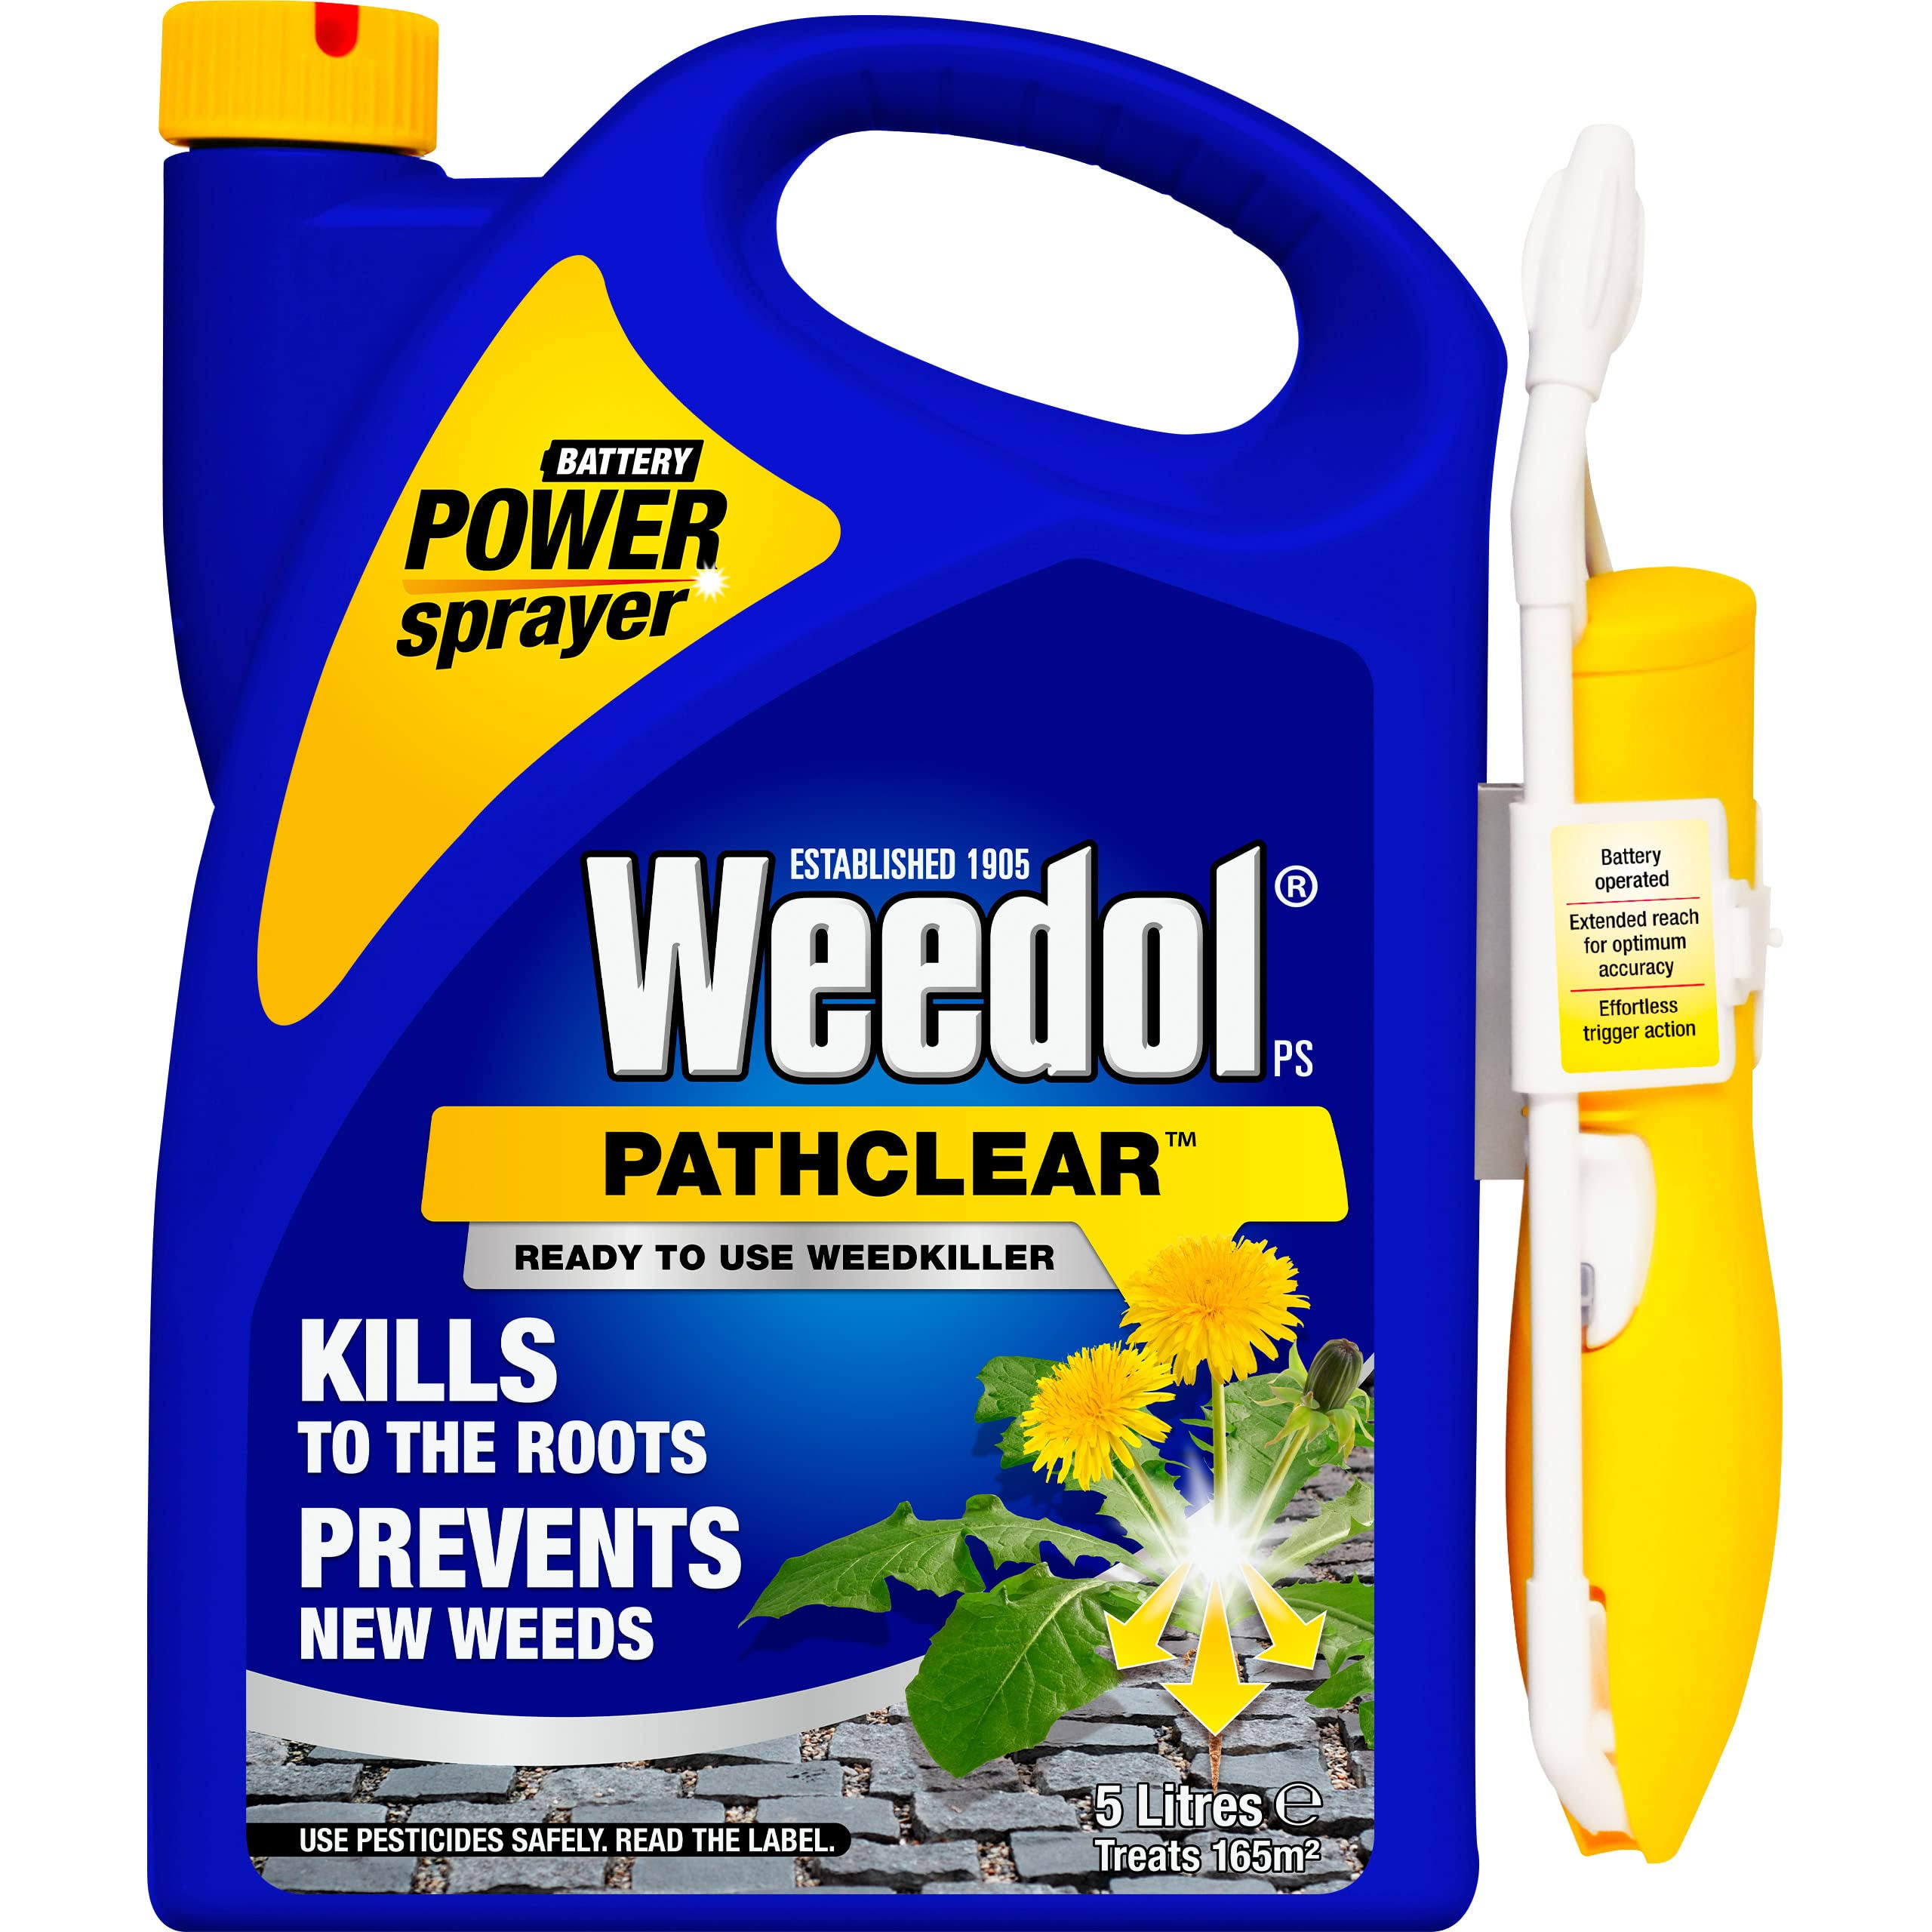 Weedol Pathclear Weedkiller with Power Sprayer, Ready to Use, 5L